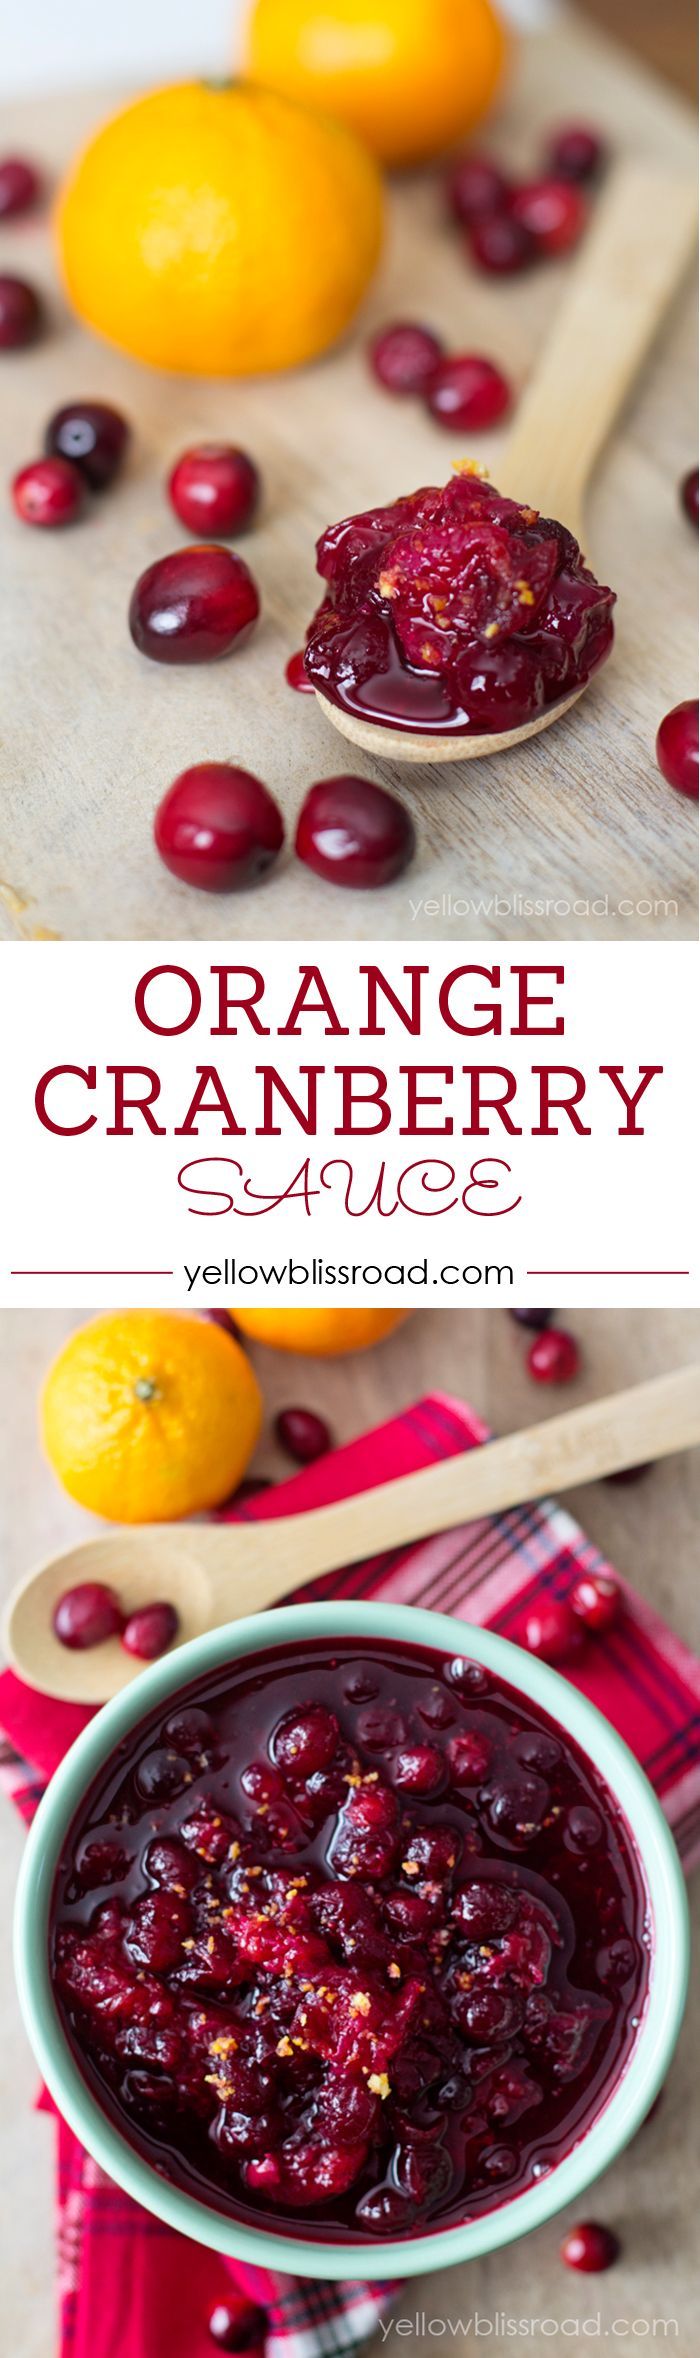 Orange Cranberry Sauce – Perfect for Thanksgiving or Christmas Dinner and especially for after Leftover Turkey Sandwiches!